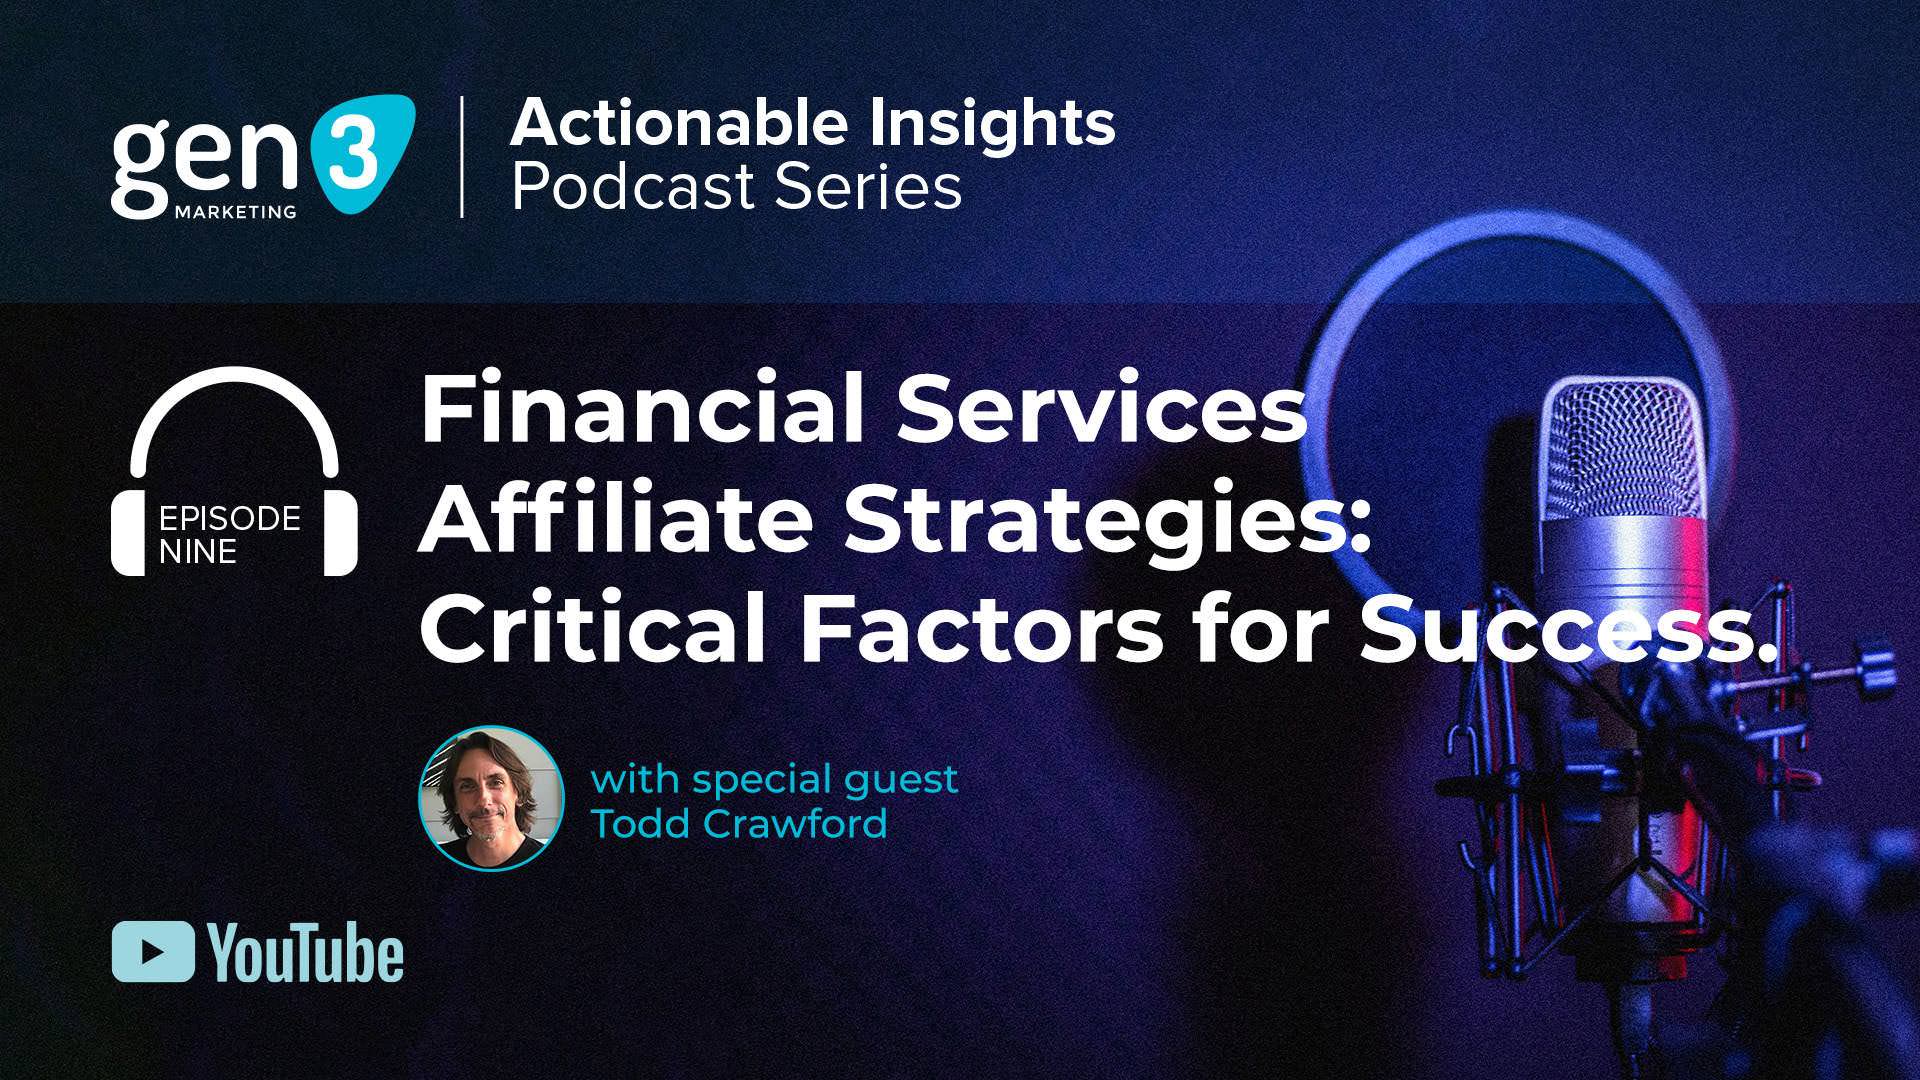 Actionable Insights Podcast Episode Nine. Financial Services Affiliate Strategies: Critical Factors for Succes with special guest Todd Crawford.